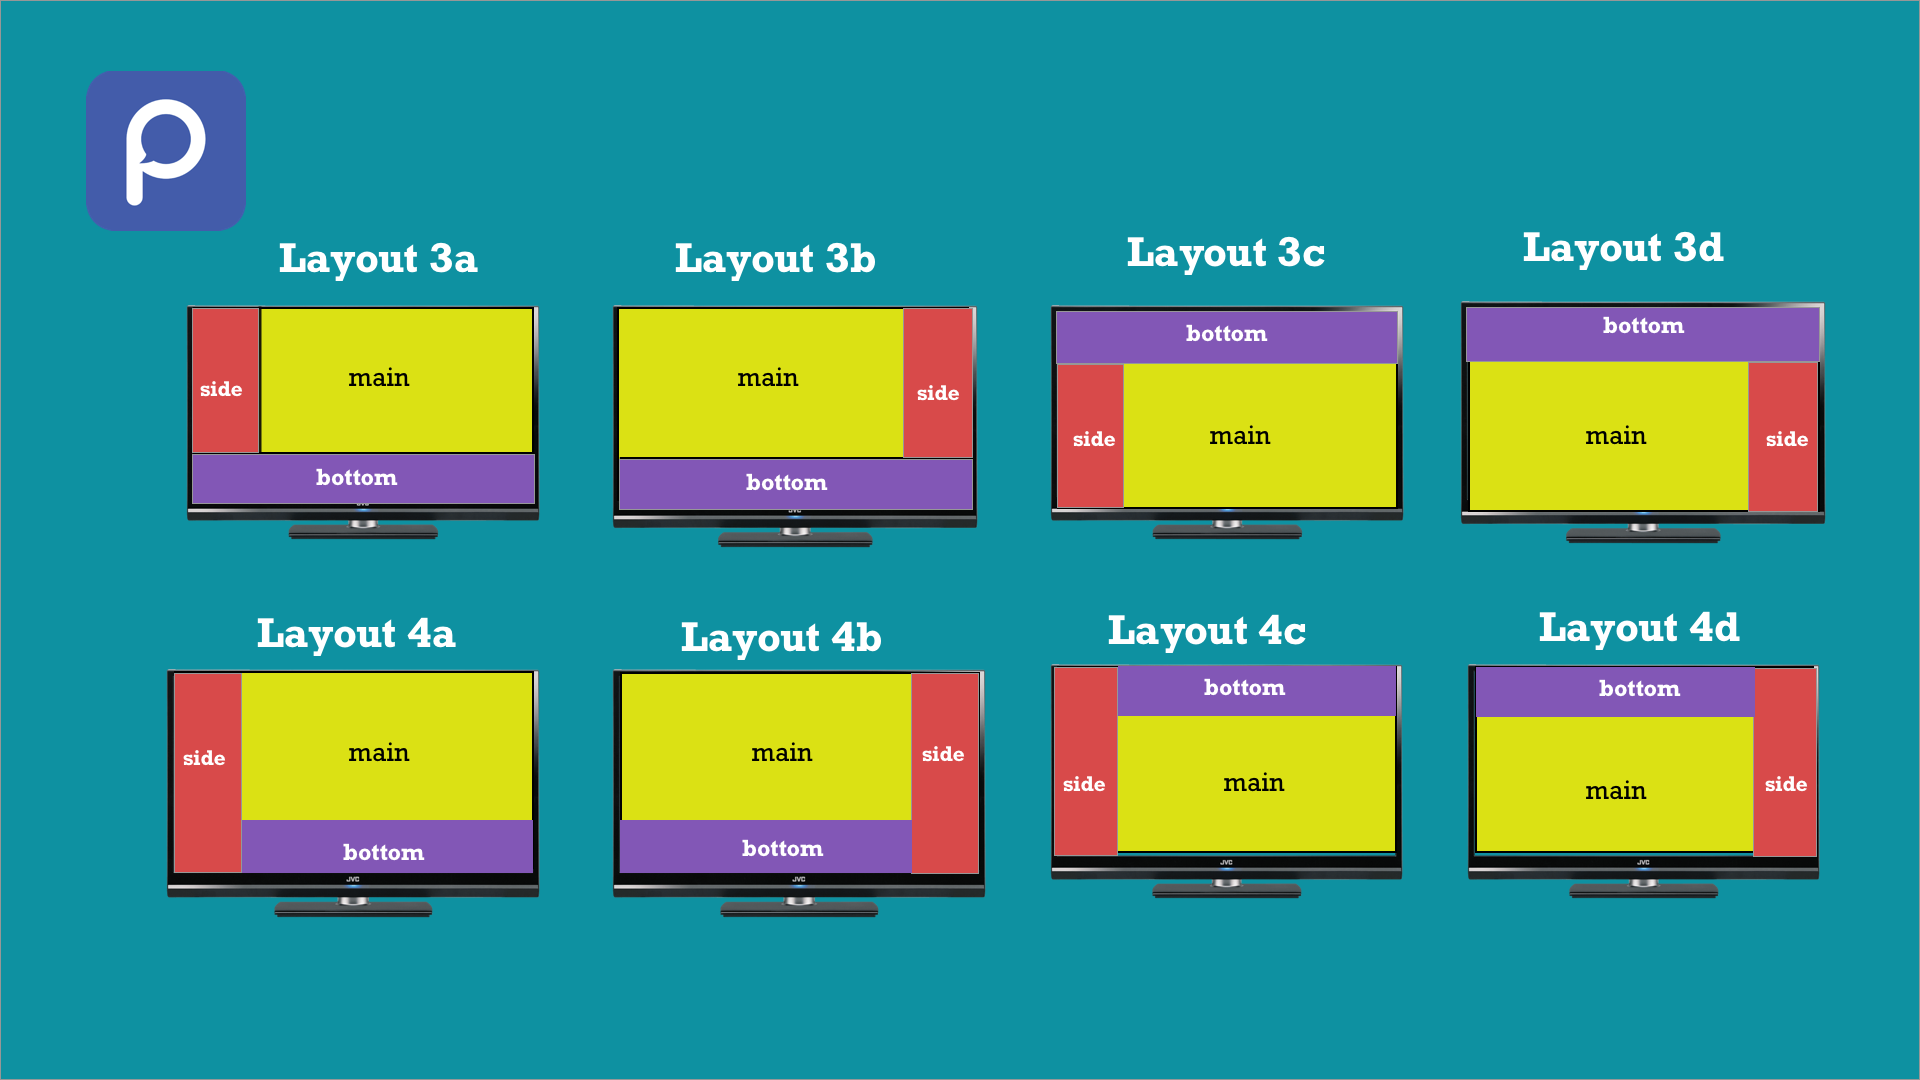 Quick demo of creating a 3 zone display in layout 3a